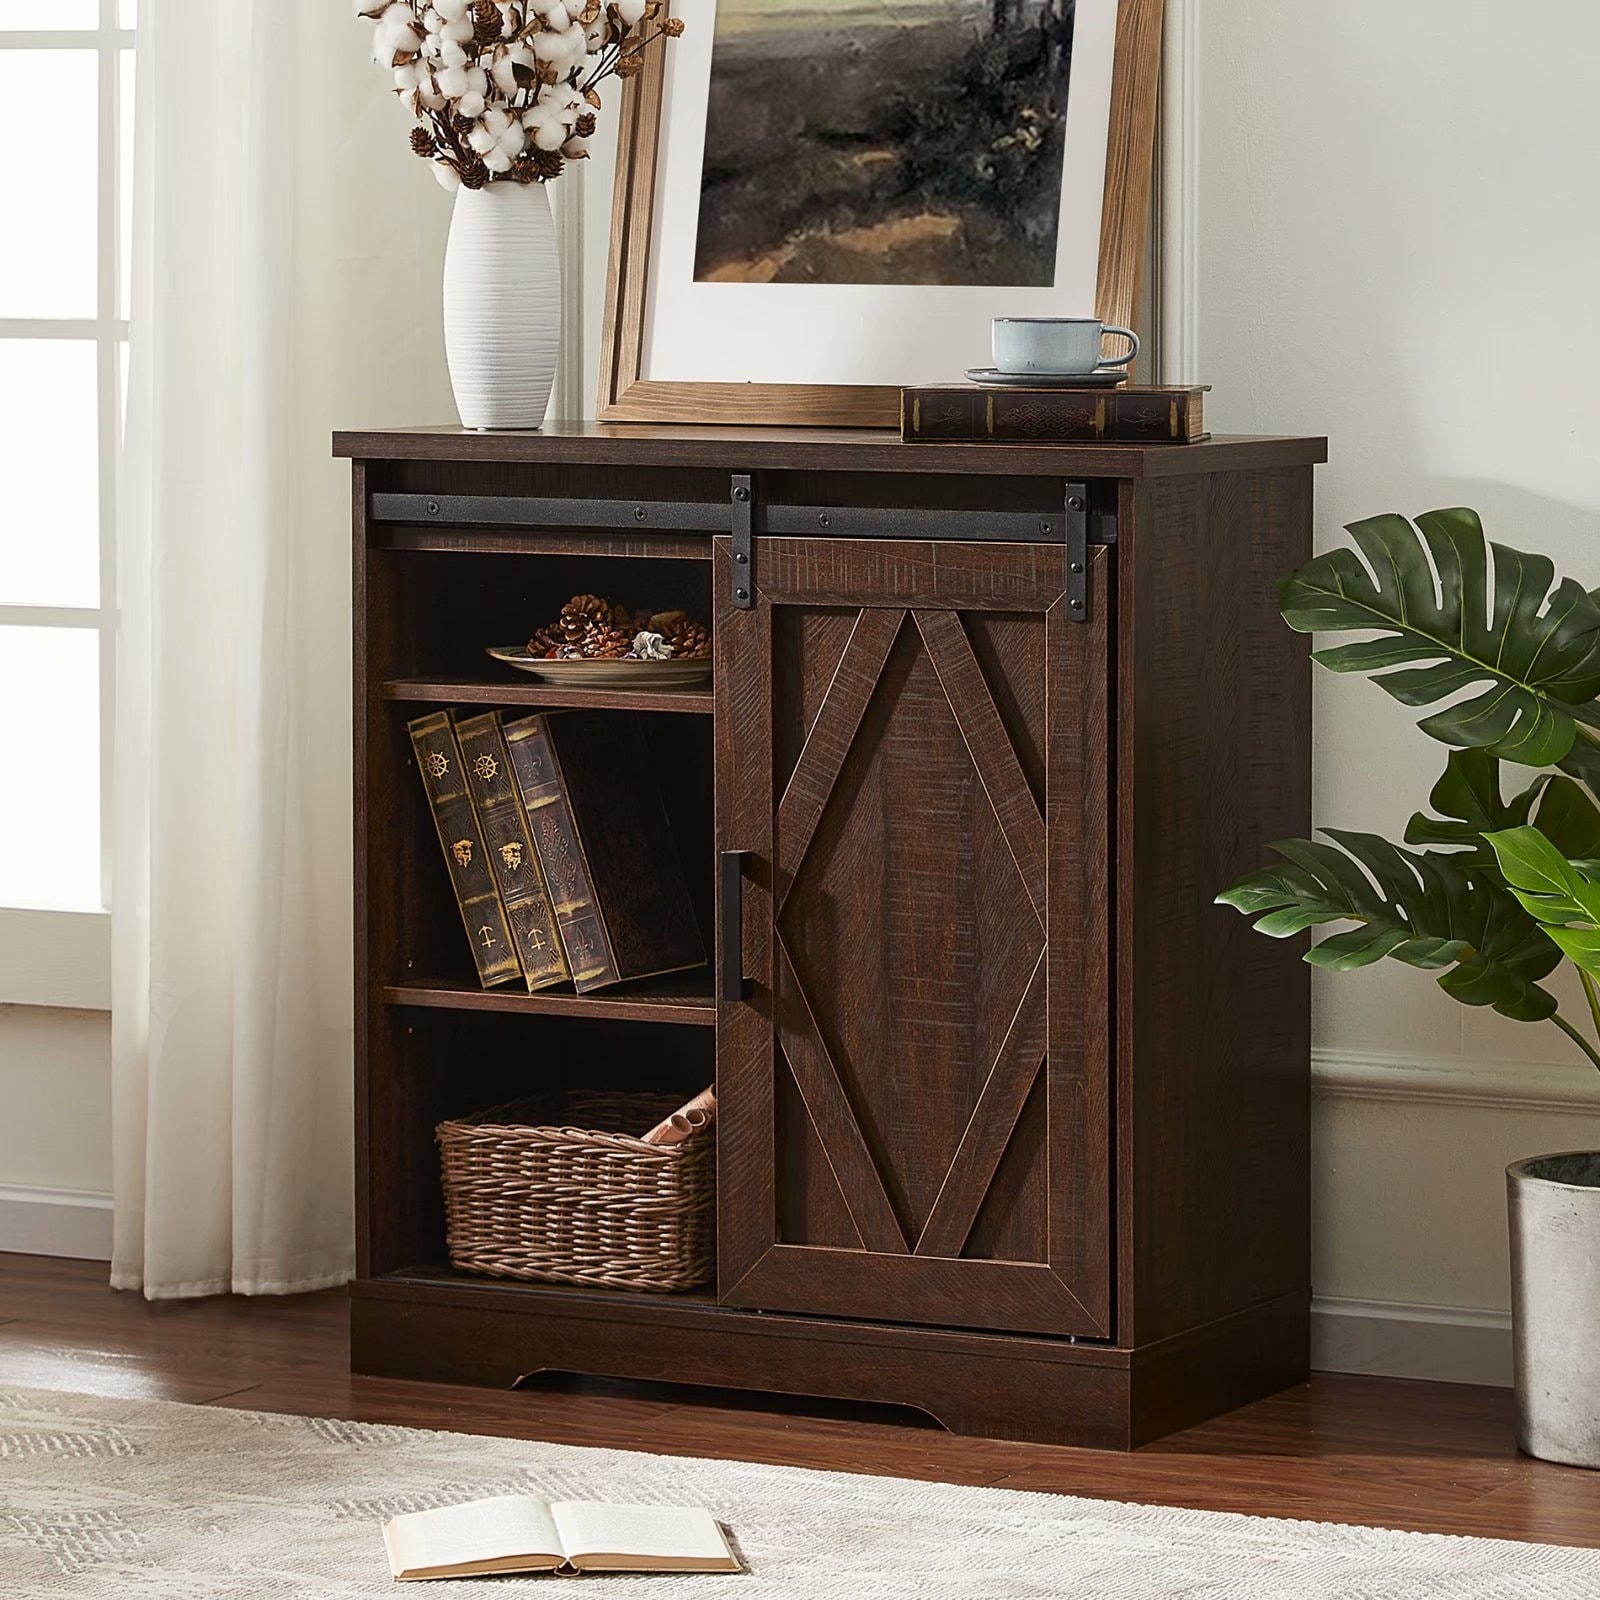 WAMPAT Home Storage Cabinet with Doors and Sliding Drawer Bathroom